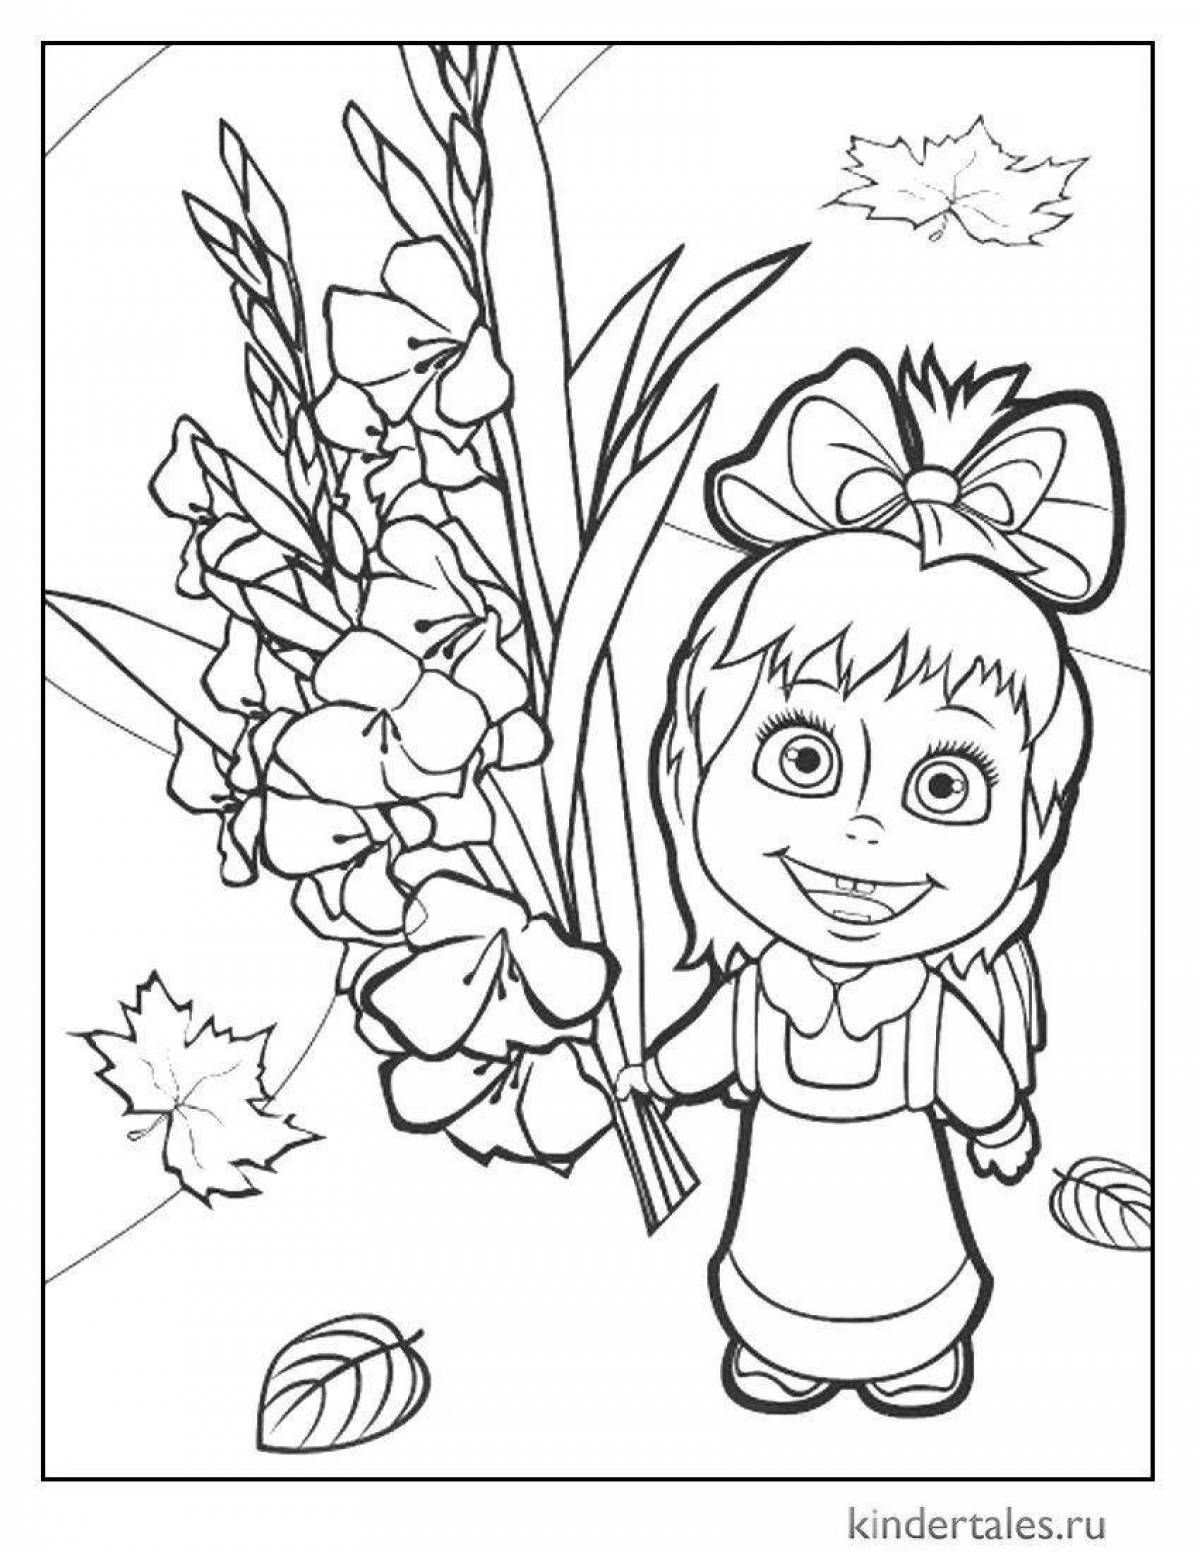 Dazzling First of September coloring page